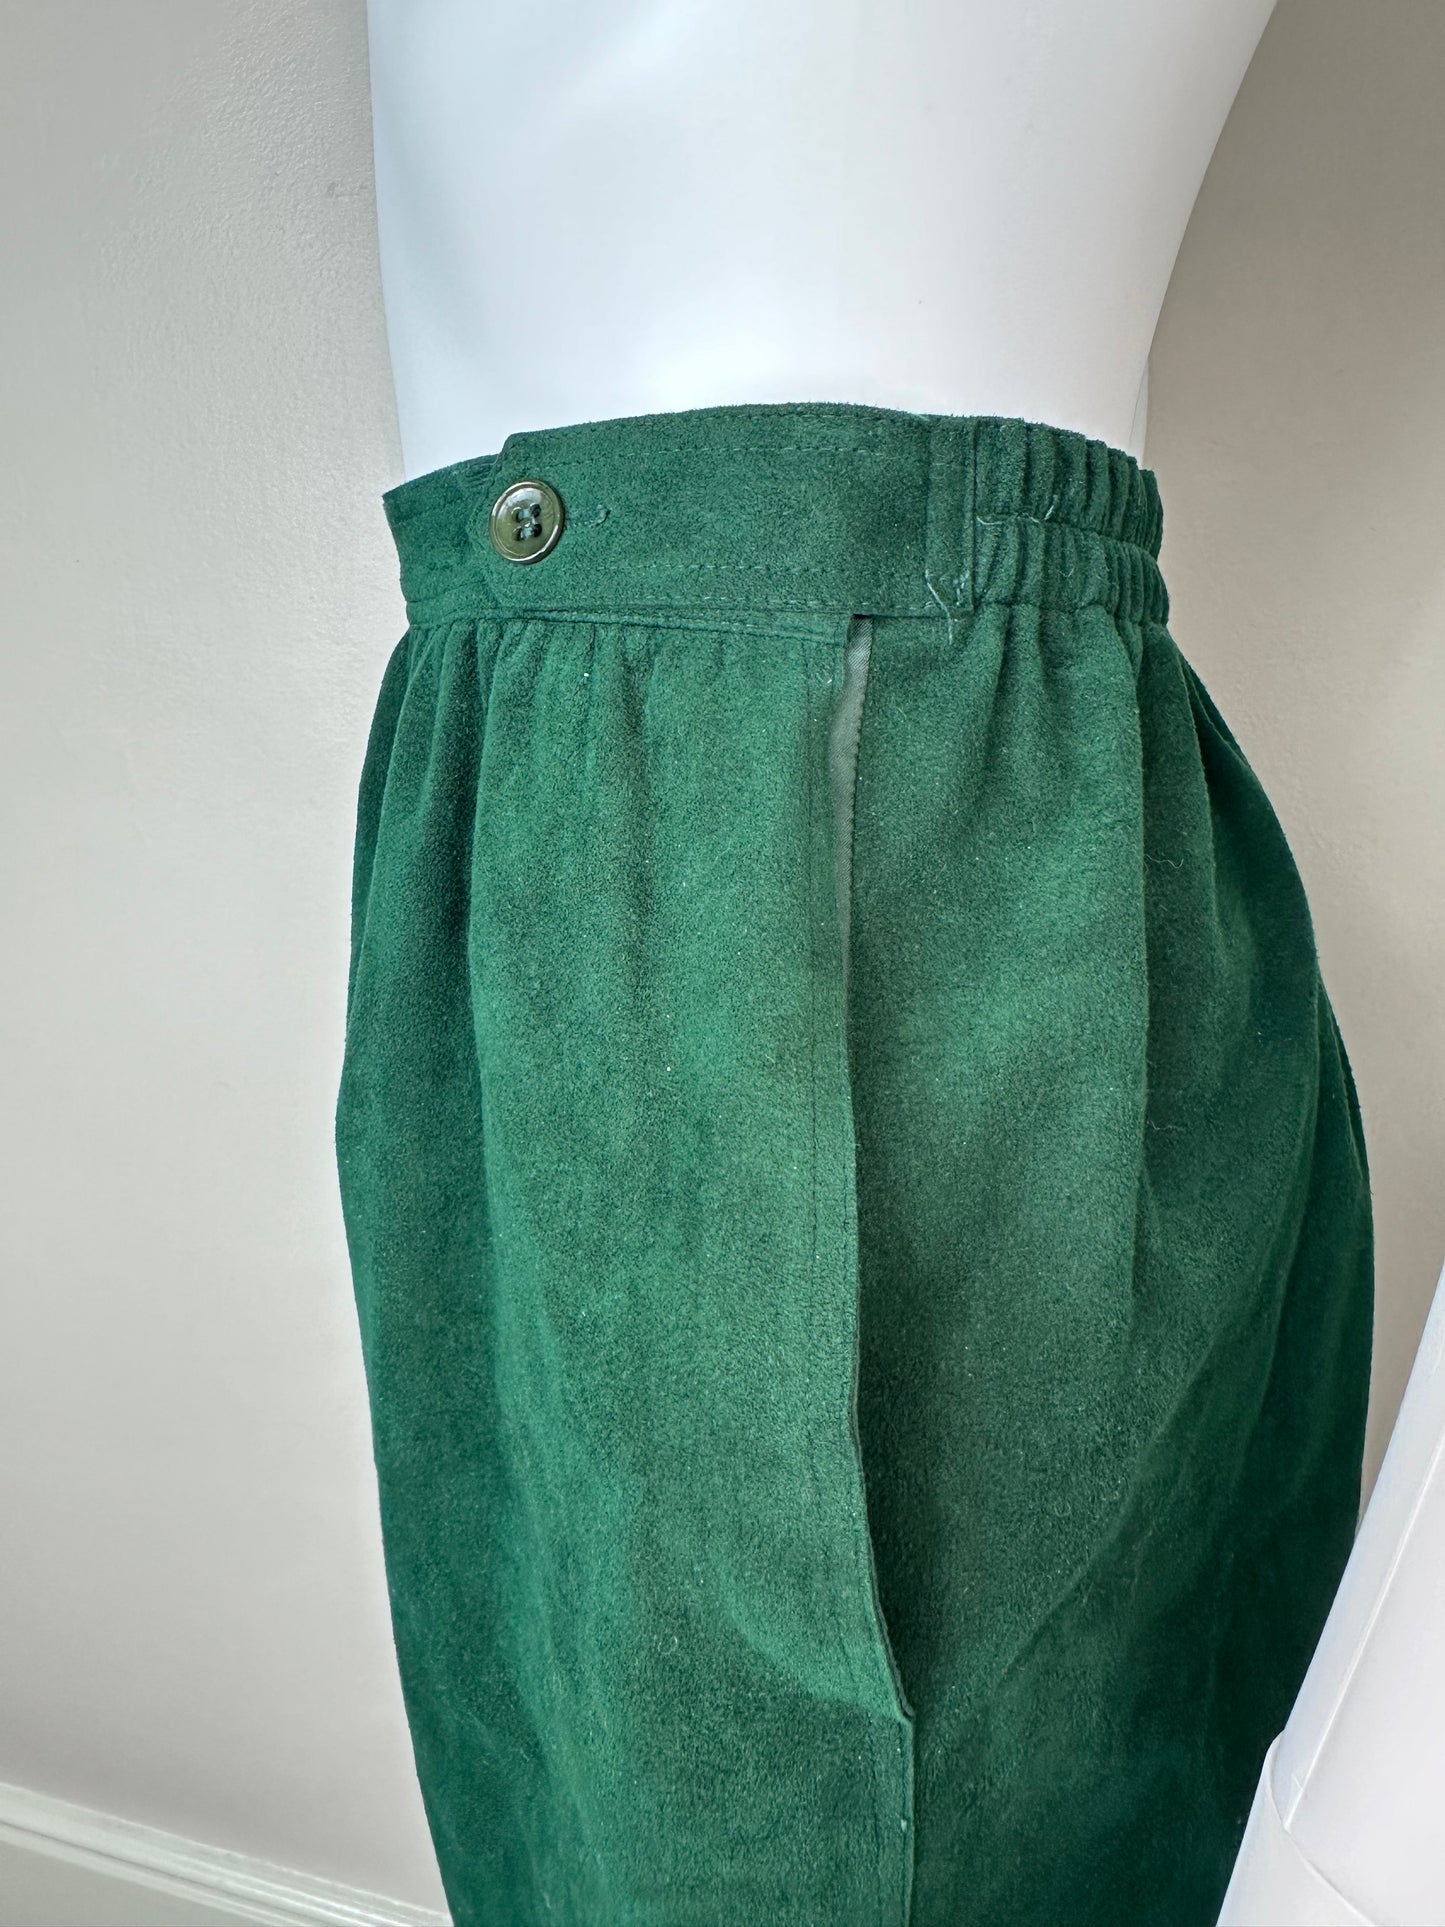 1980s Green Ultrasuede Vest and Skirt Set, Signatures by Russ Taylor Size Small-Medium